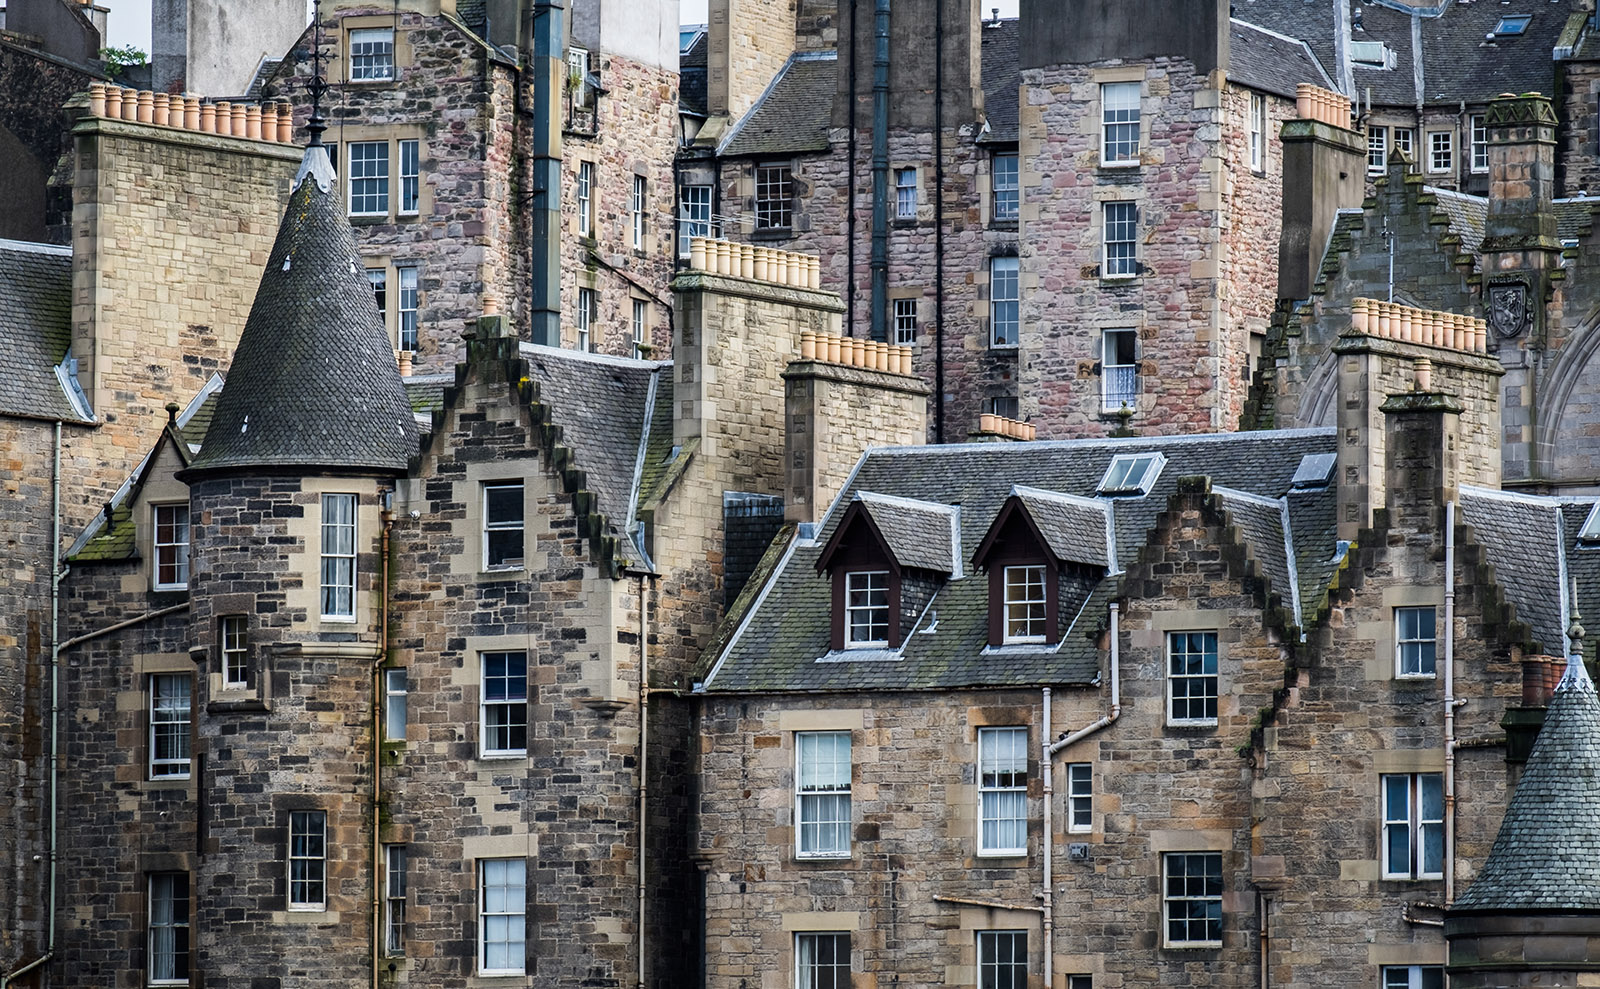 Take a Stroll Through the Spookier Side of Edinburgh in 'City of Ghosts'